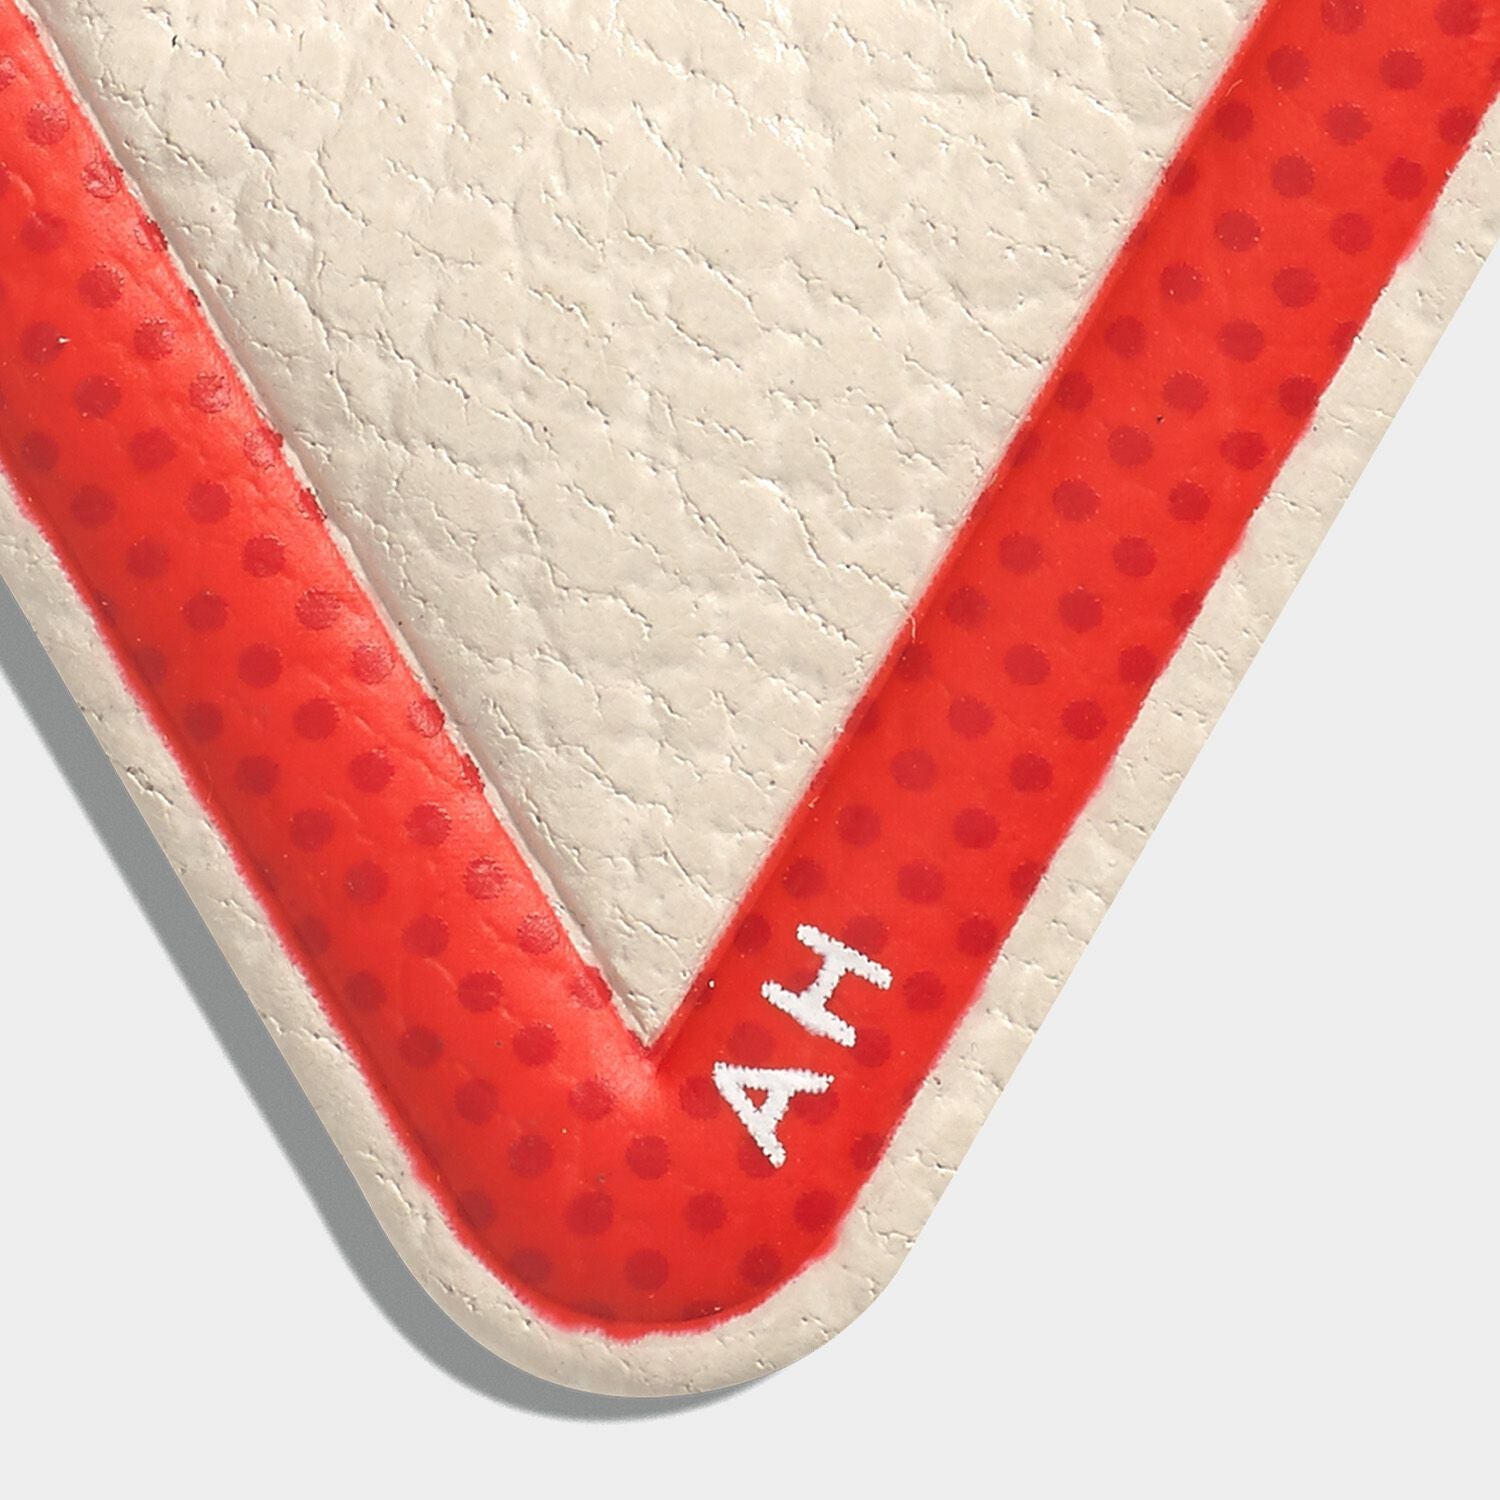 Give Way Leather Stickers -

                  
                    Capra in Chalk -
                  

                  Anya Hindmarch US
